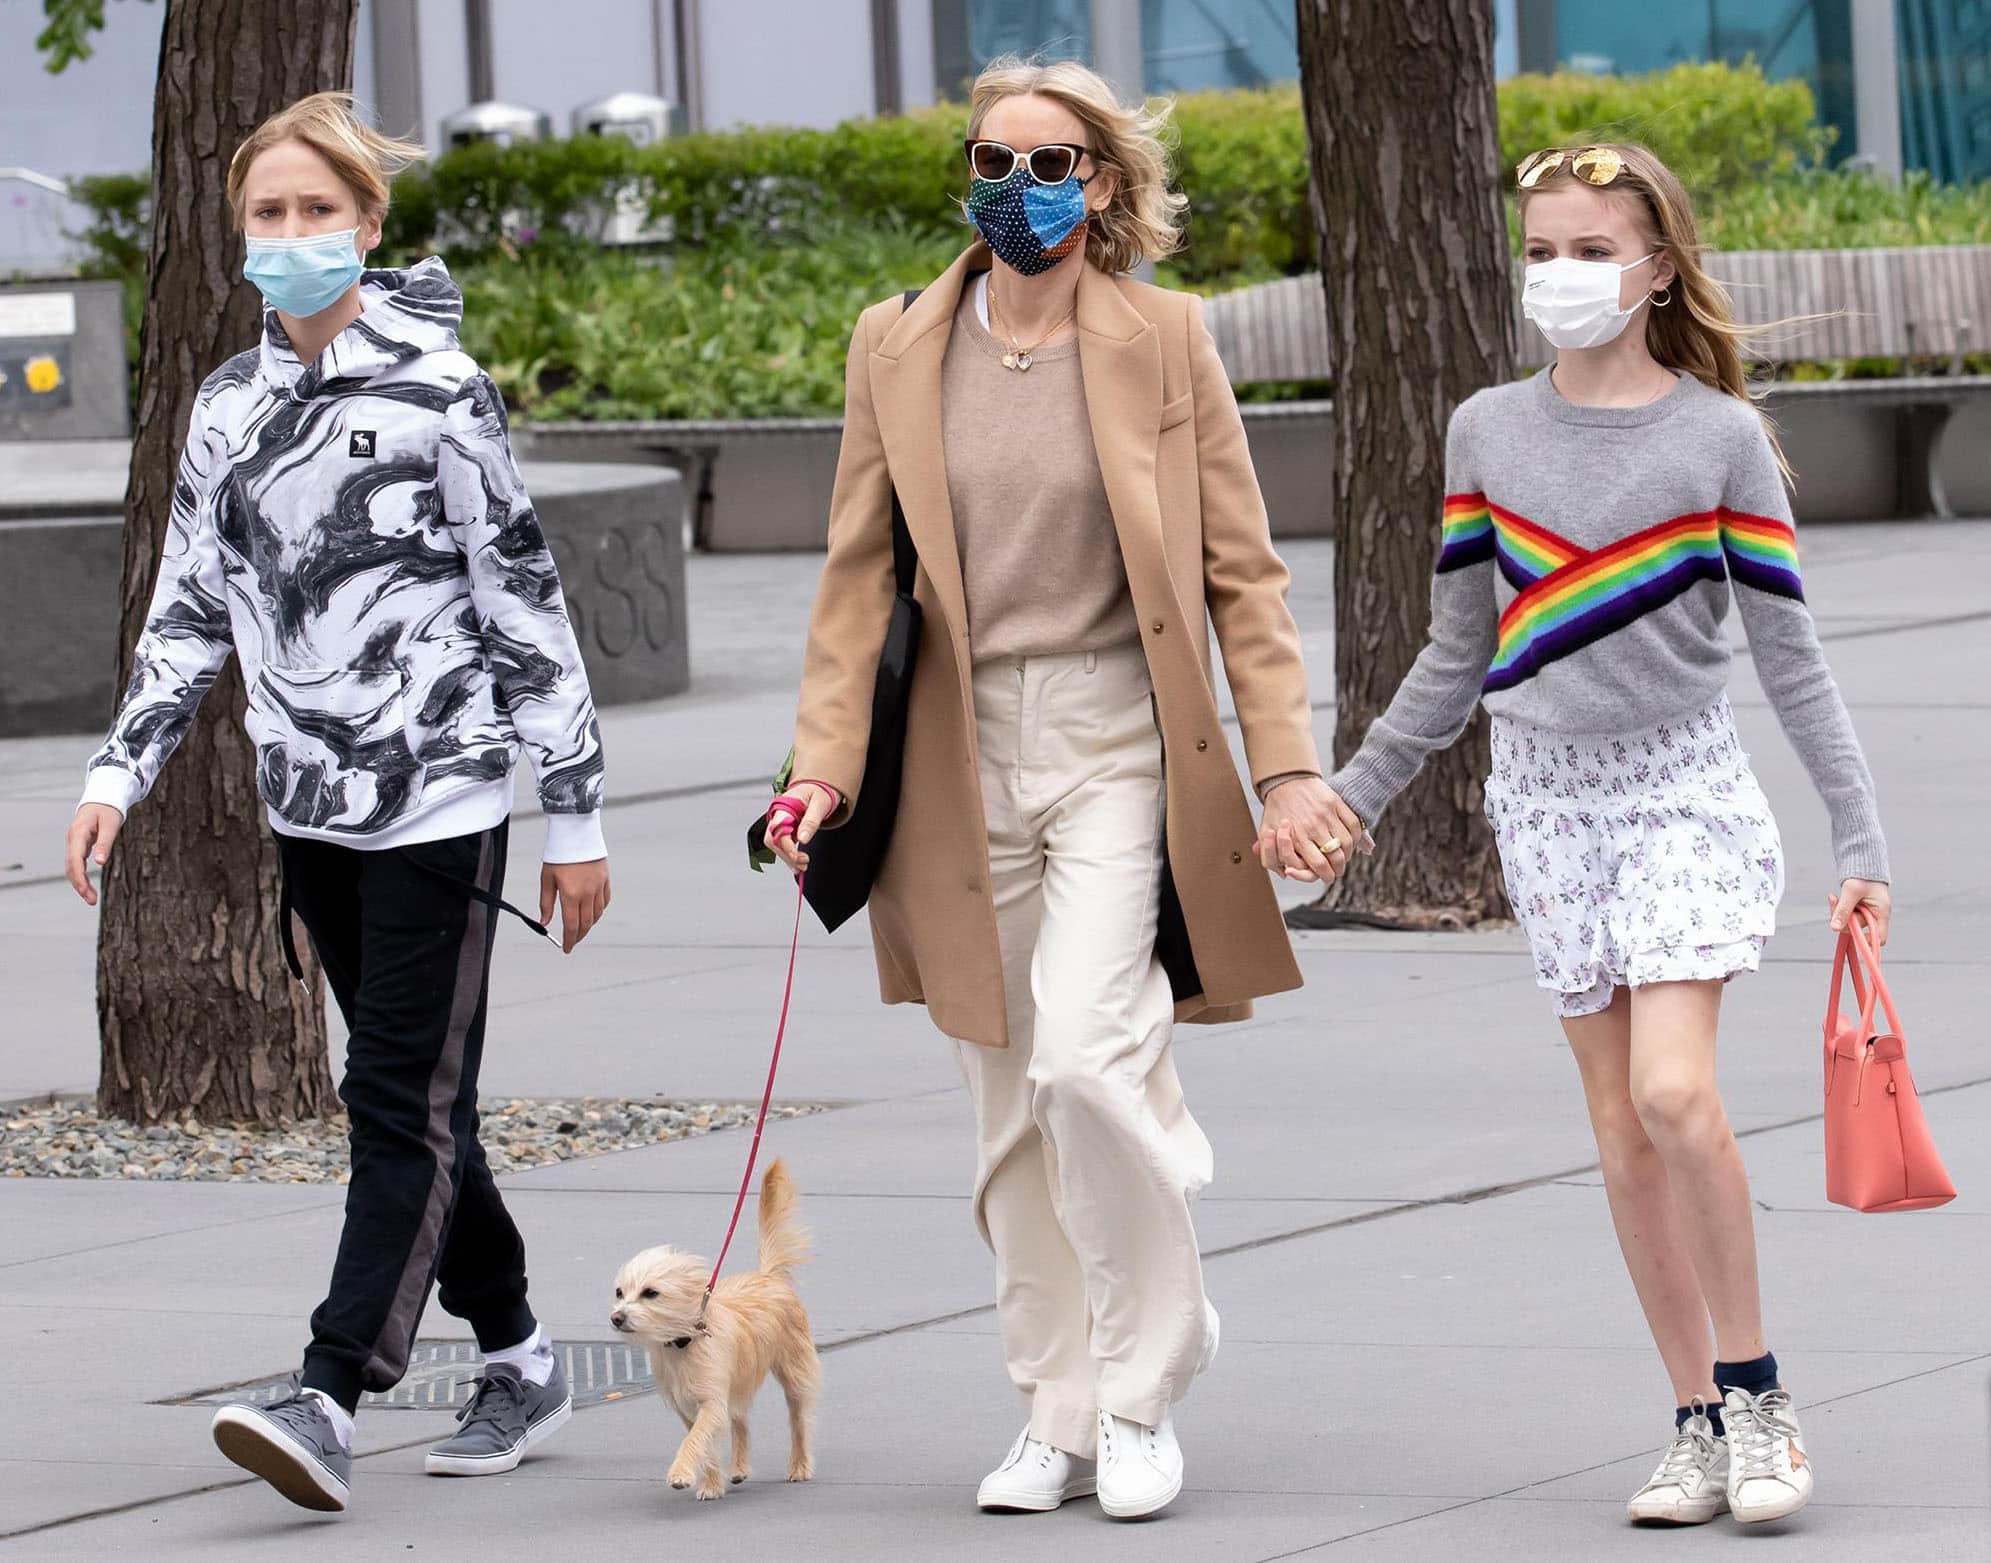 Naomi Watts enjoys a rare public outing with her sons in New York City on May 9, 2021